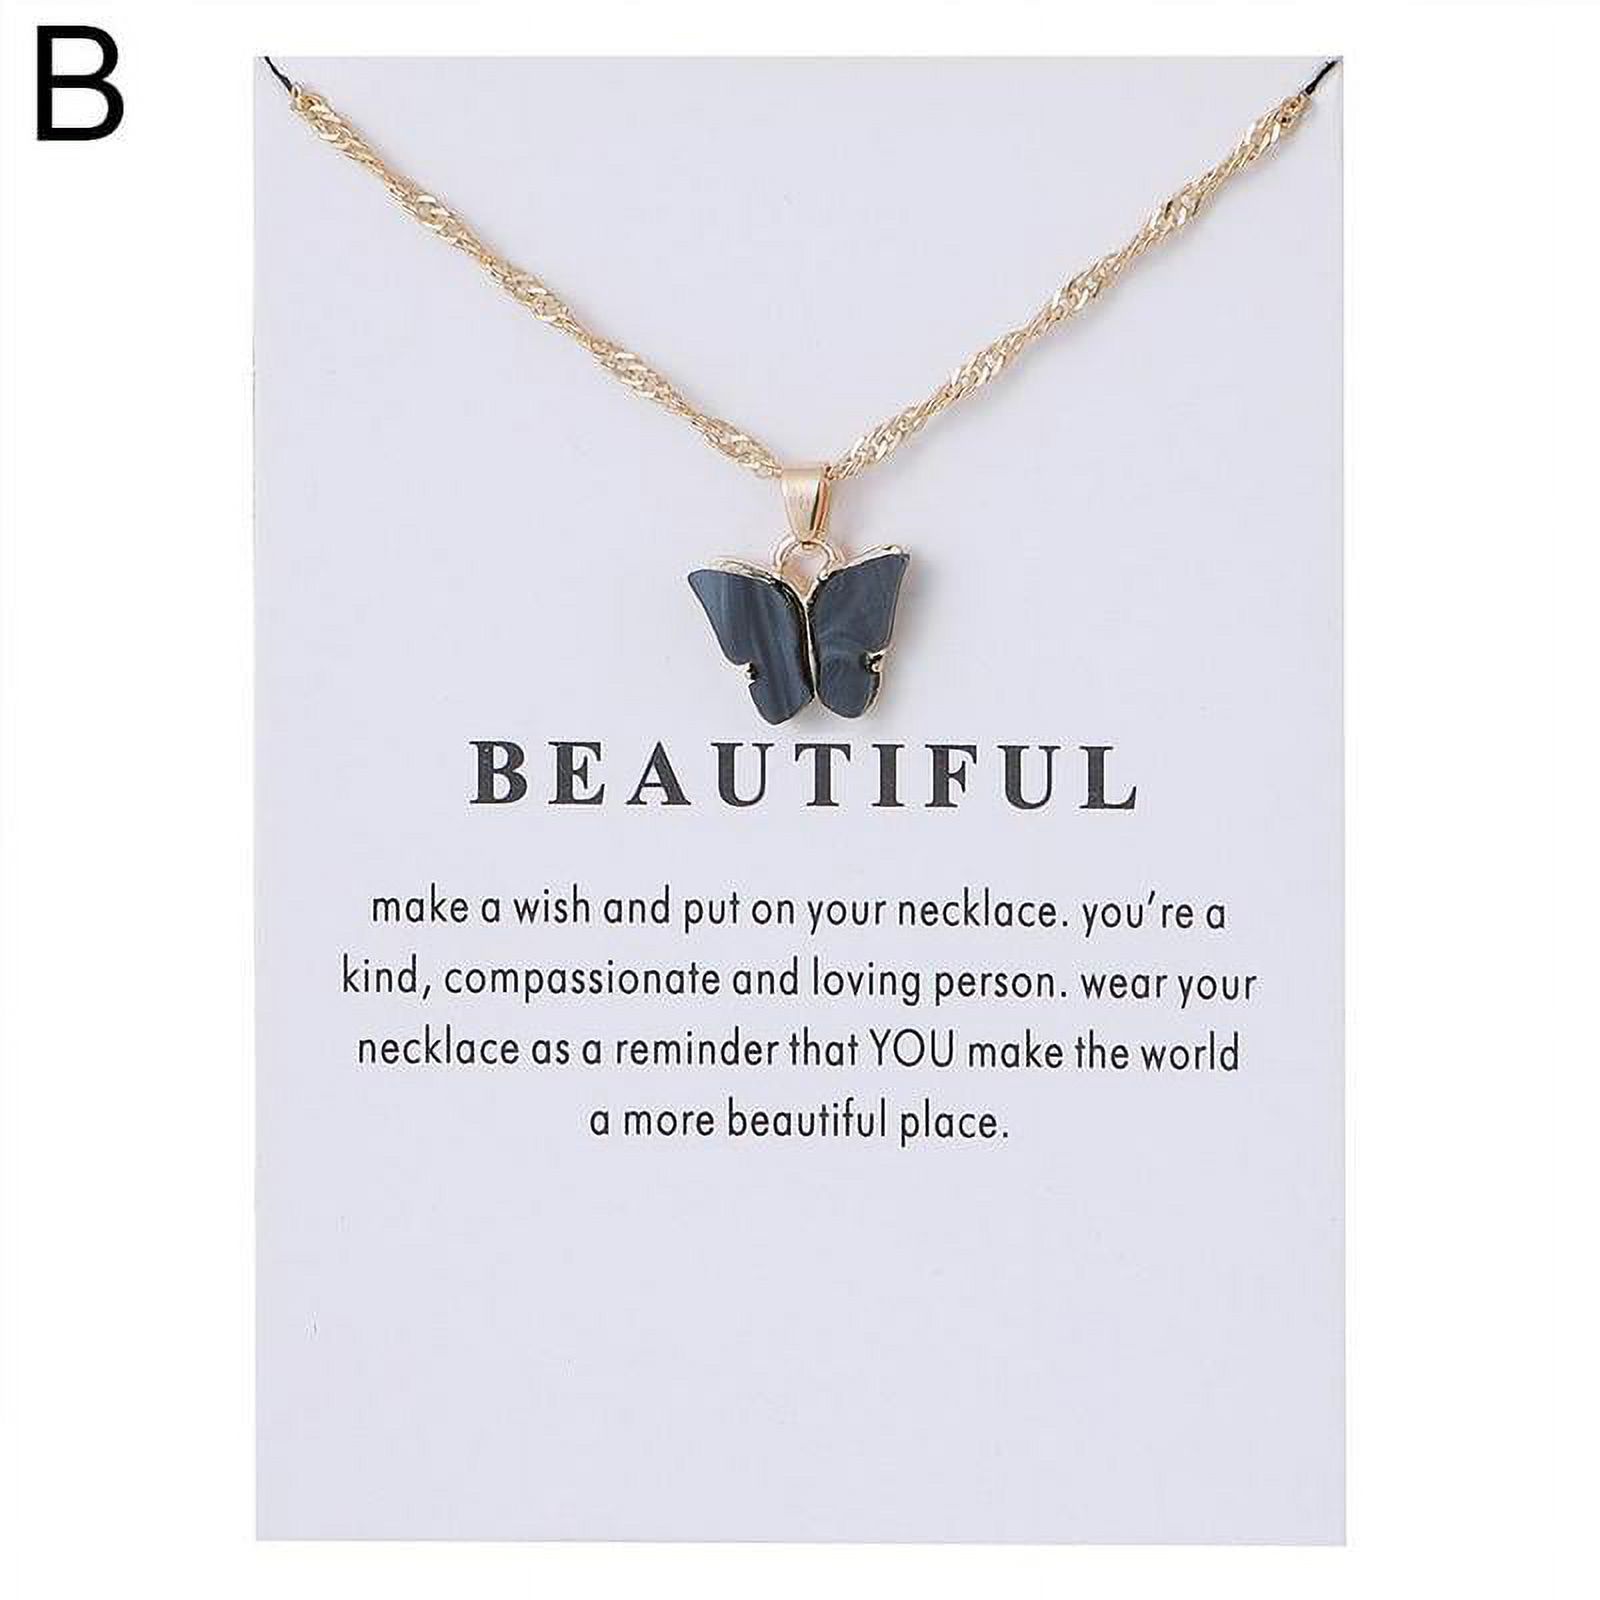 Butterfly Acrylic Pendant Necklace Clavicle Choker Jewelry Chain New Women F4A5 - image 1 of 9